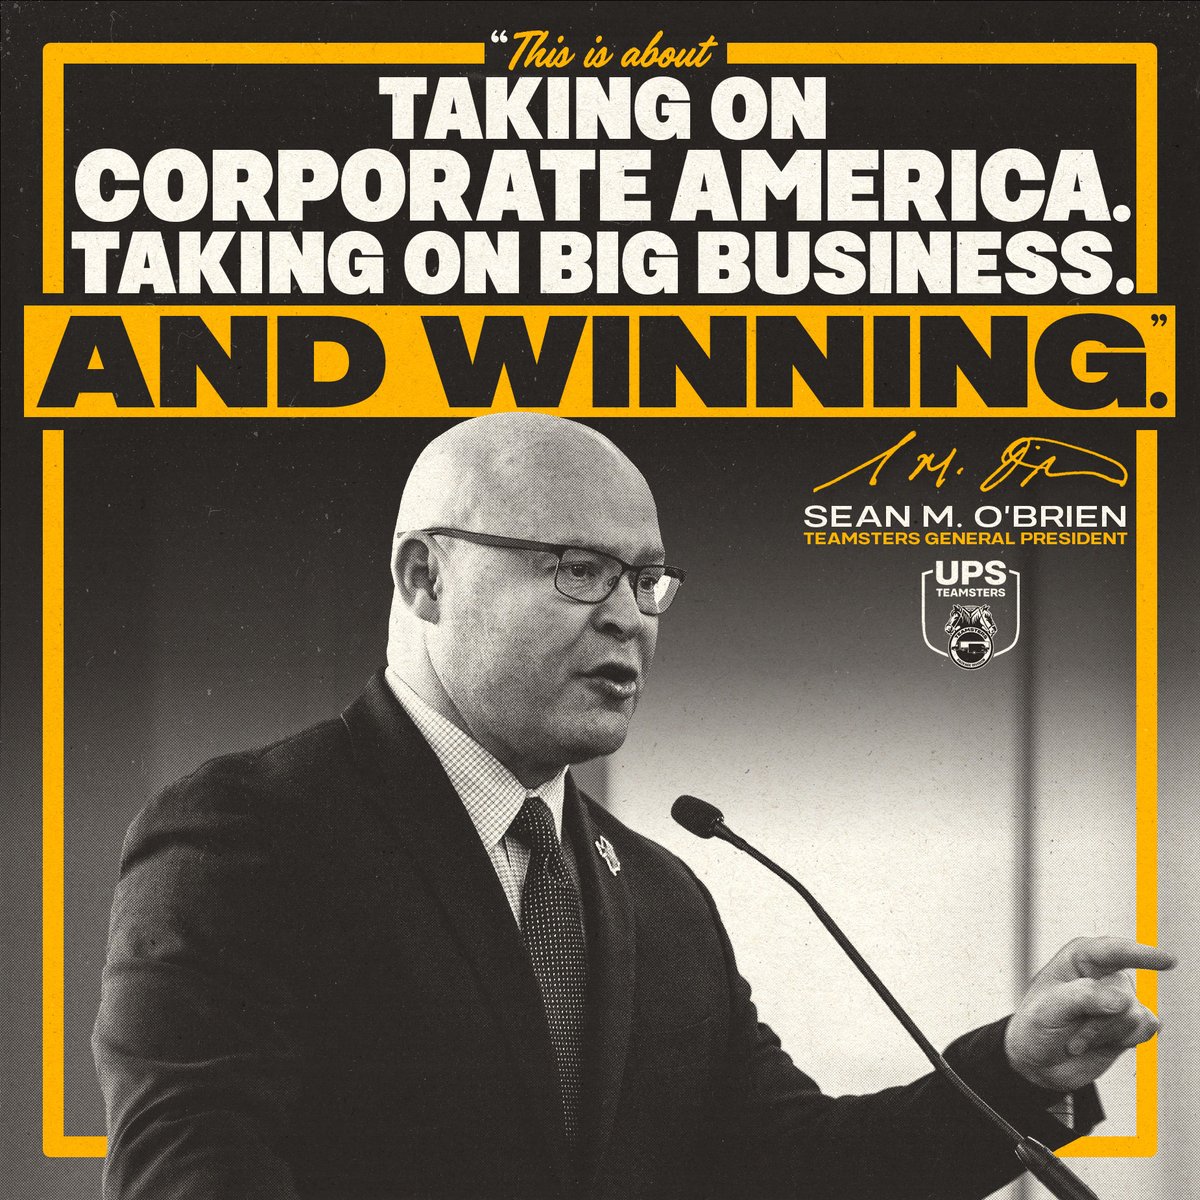 UPS TEAMSTERS WILL WIN AGAINST CORPORATE AMERICA For too long, companies like @UPS have taken in profits while taking for granted the workers who make those profits possible. Corporate America cannot be allowed to degrade standards for working people. #1u